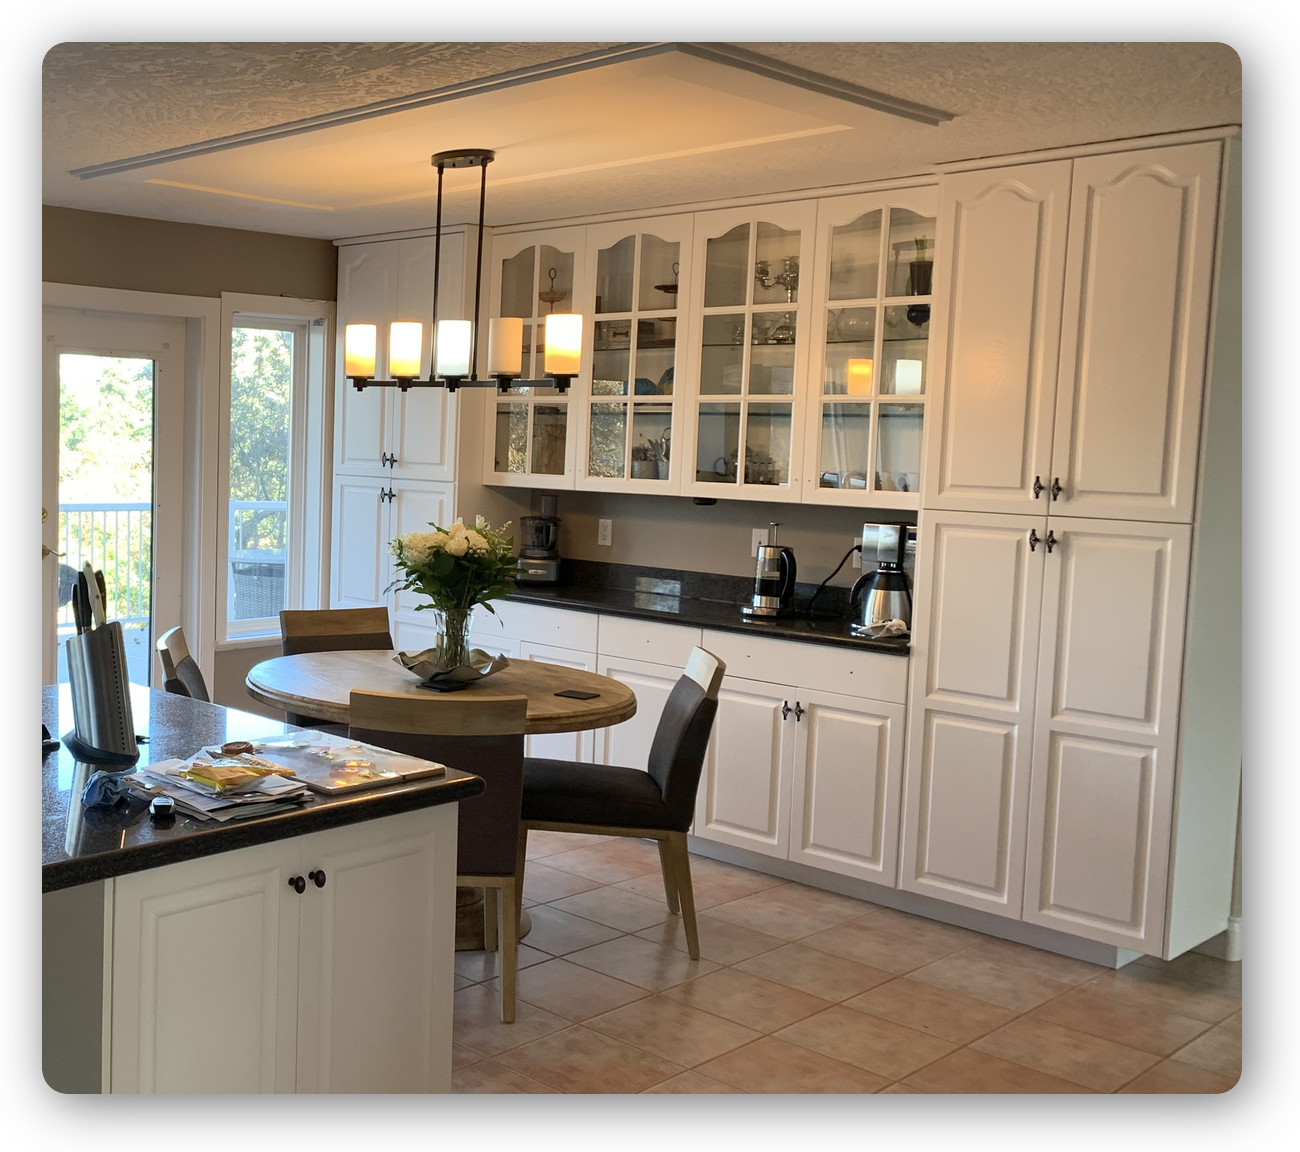 Kitchen Cabinet Painting - Do you need to paint inside the cupboards or shelves?